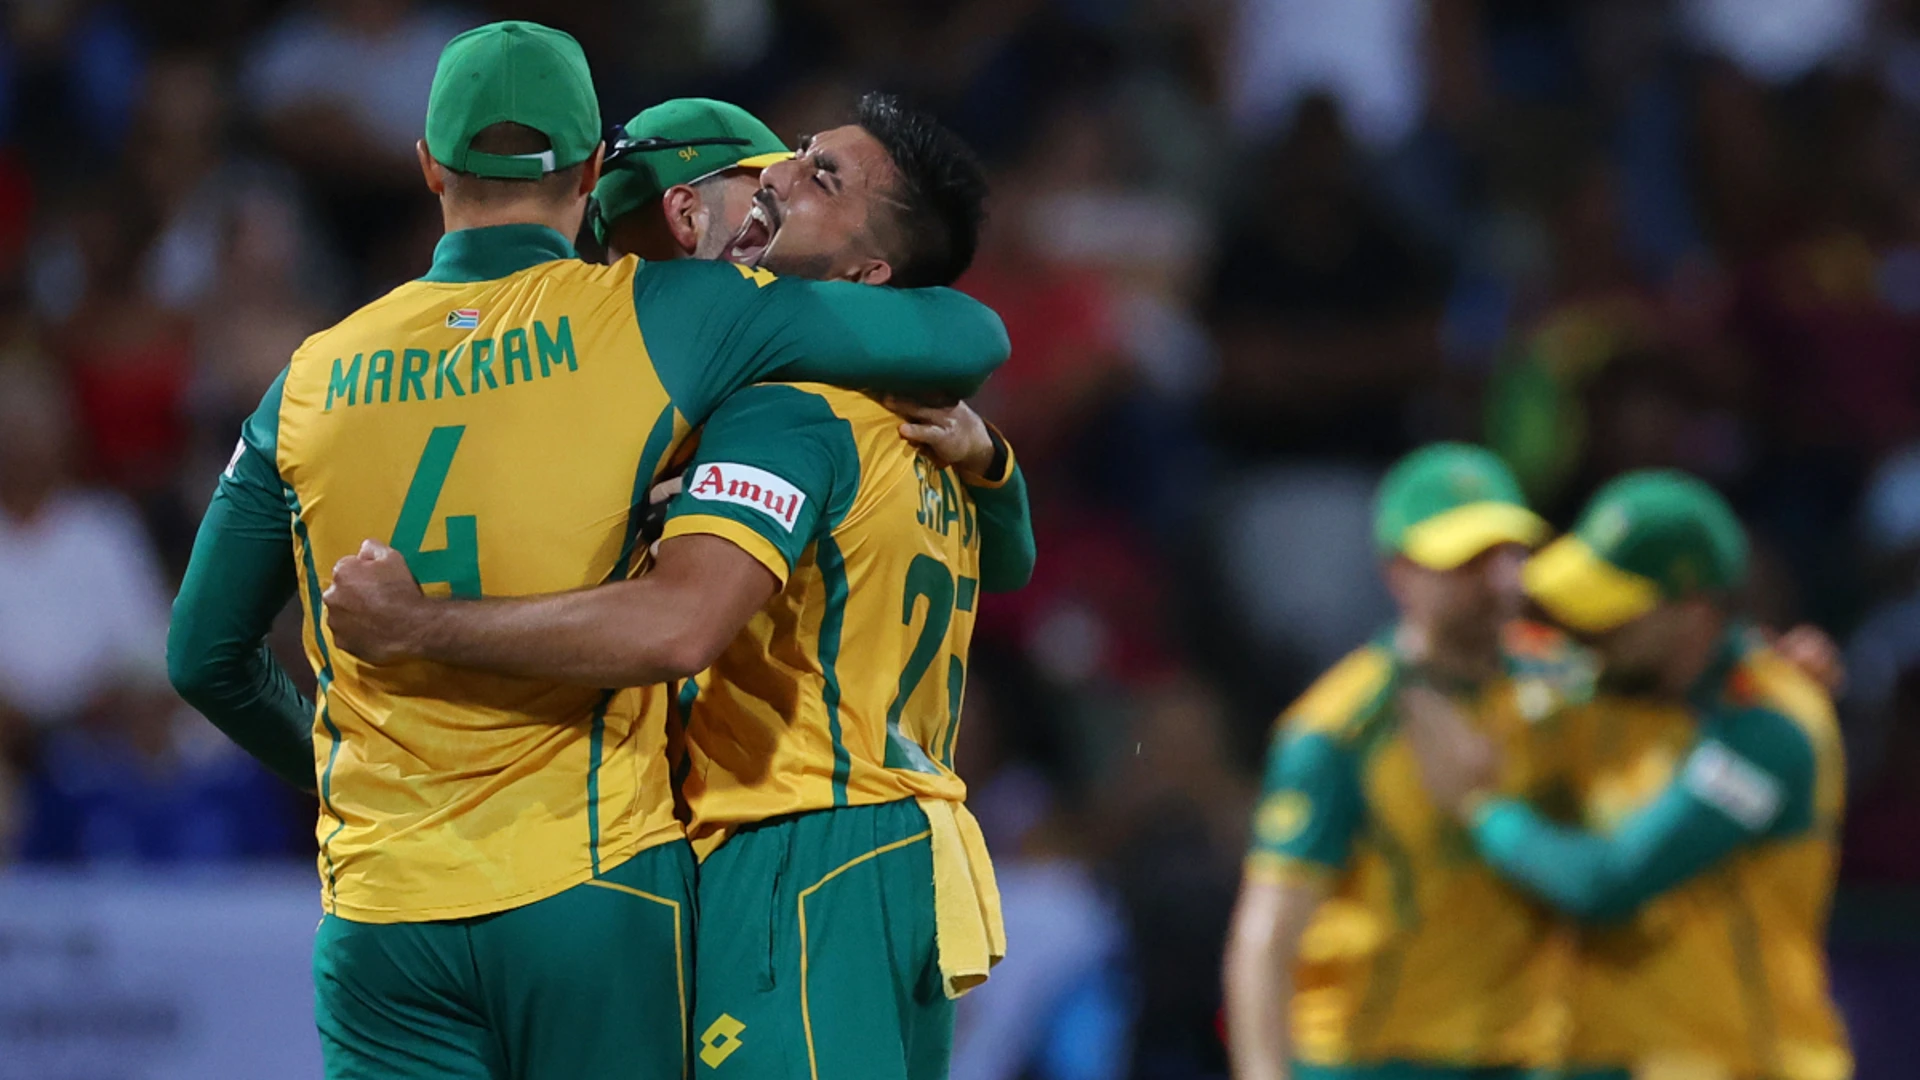 WRAP: Down to the last four, destiny beckons for Proteas